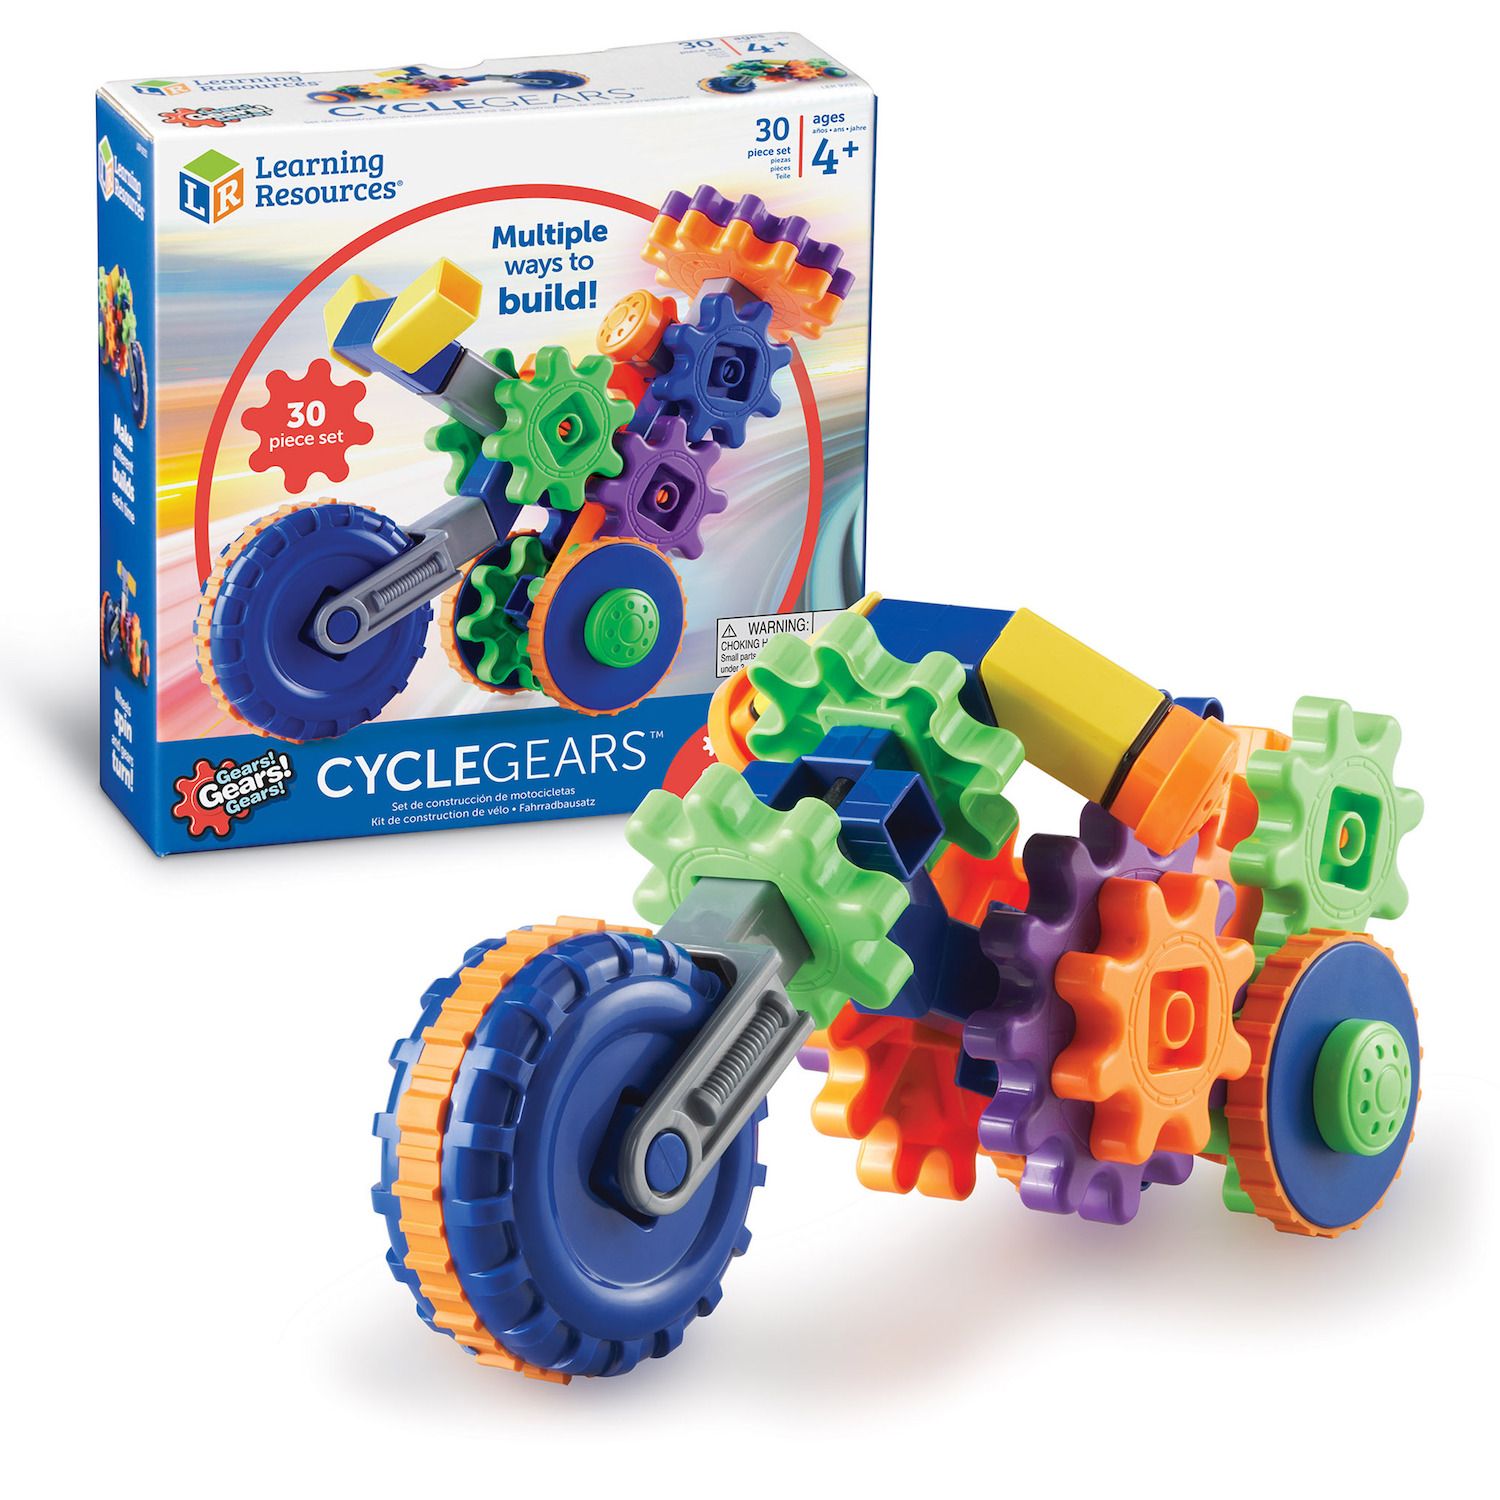 Image for Learning Resources Gears! Gears! Gears! CycleGears at Kohl's.